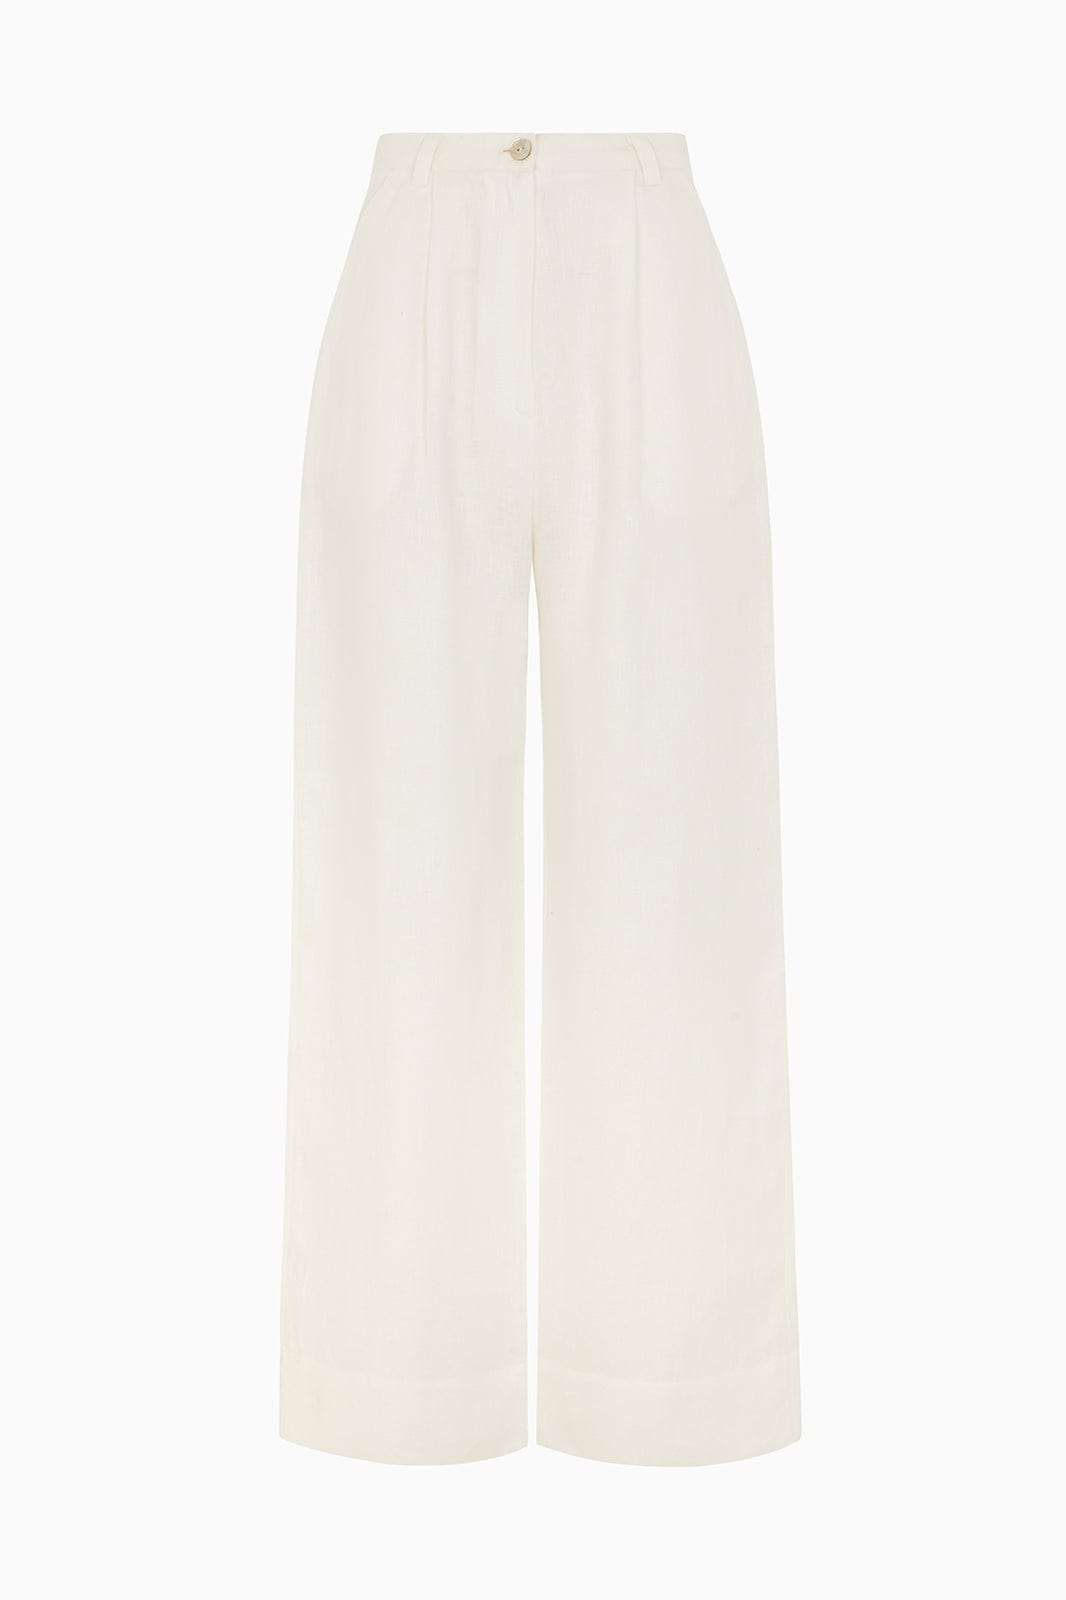 arkitaip - The Wabi Pleated Linen Trousers in off-white